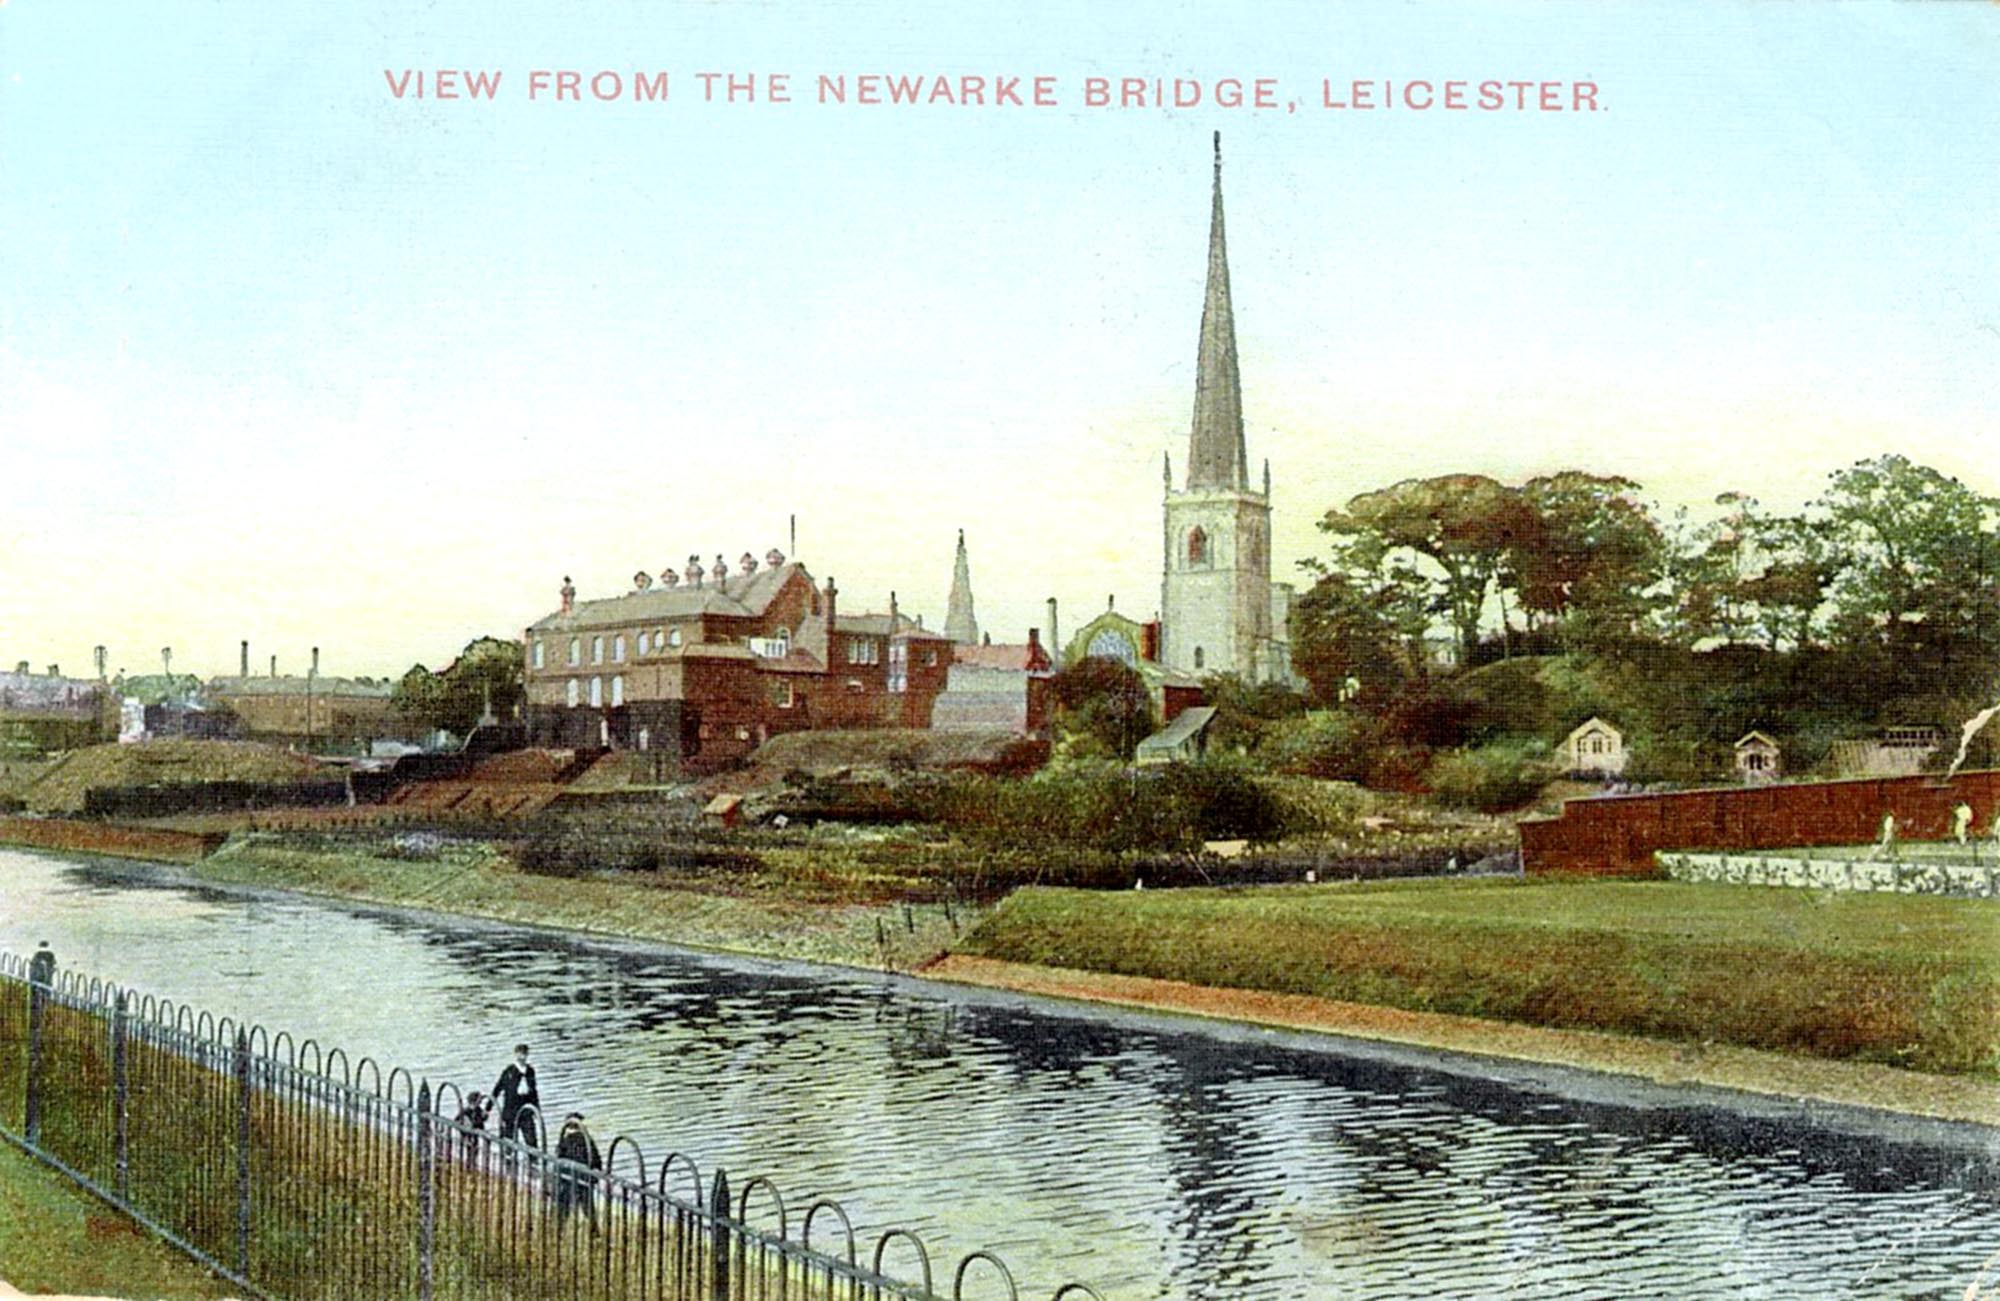 A postcard of Leicester Castle viewed from the Newarke Bridge, c.1909 - 